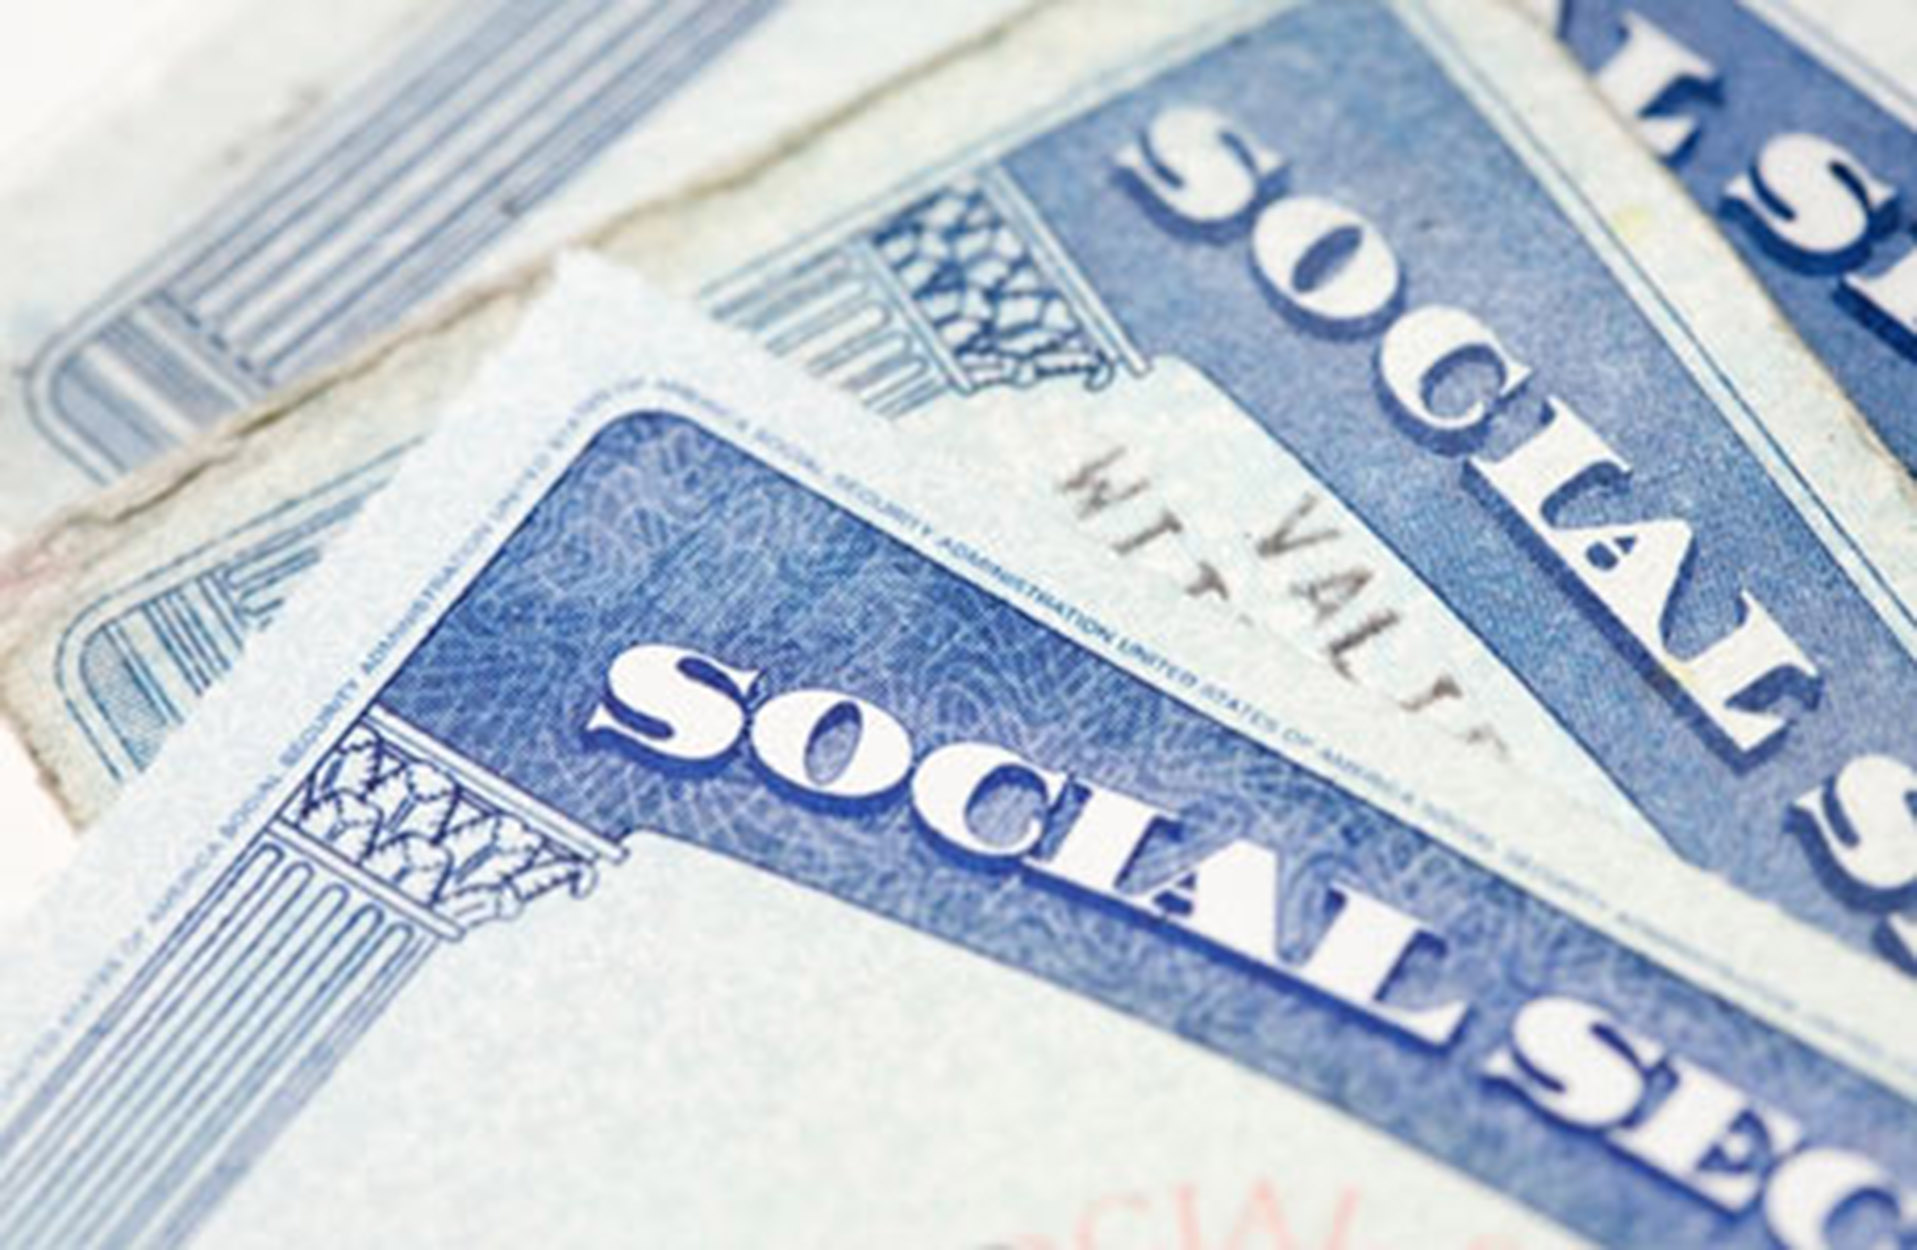 Motley Fool: Why Social Security alone can’t fund retirement